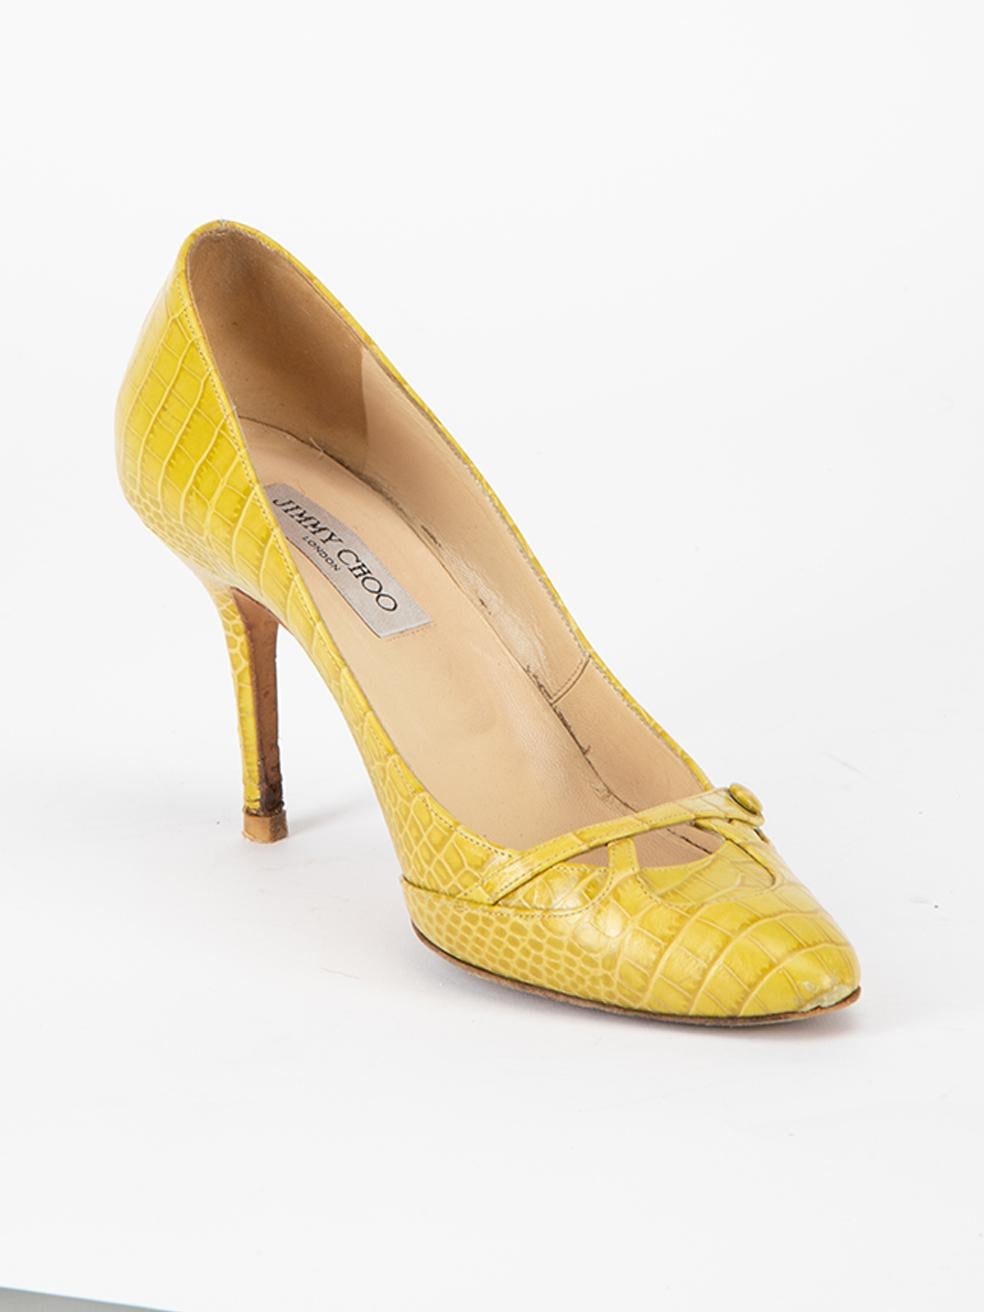 CONDITION is Very good. Minimal wear to heels is evident. Wear can be seen to toe tips, outer vamp material and interior suede material. There is also wear to both heel tips on this used Jimmy Choo designer resale item.   Details  Green Crocodile